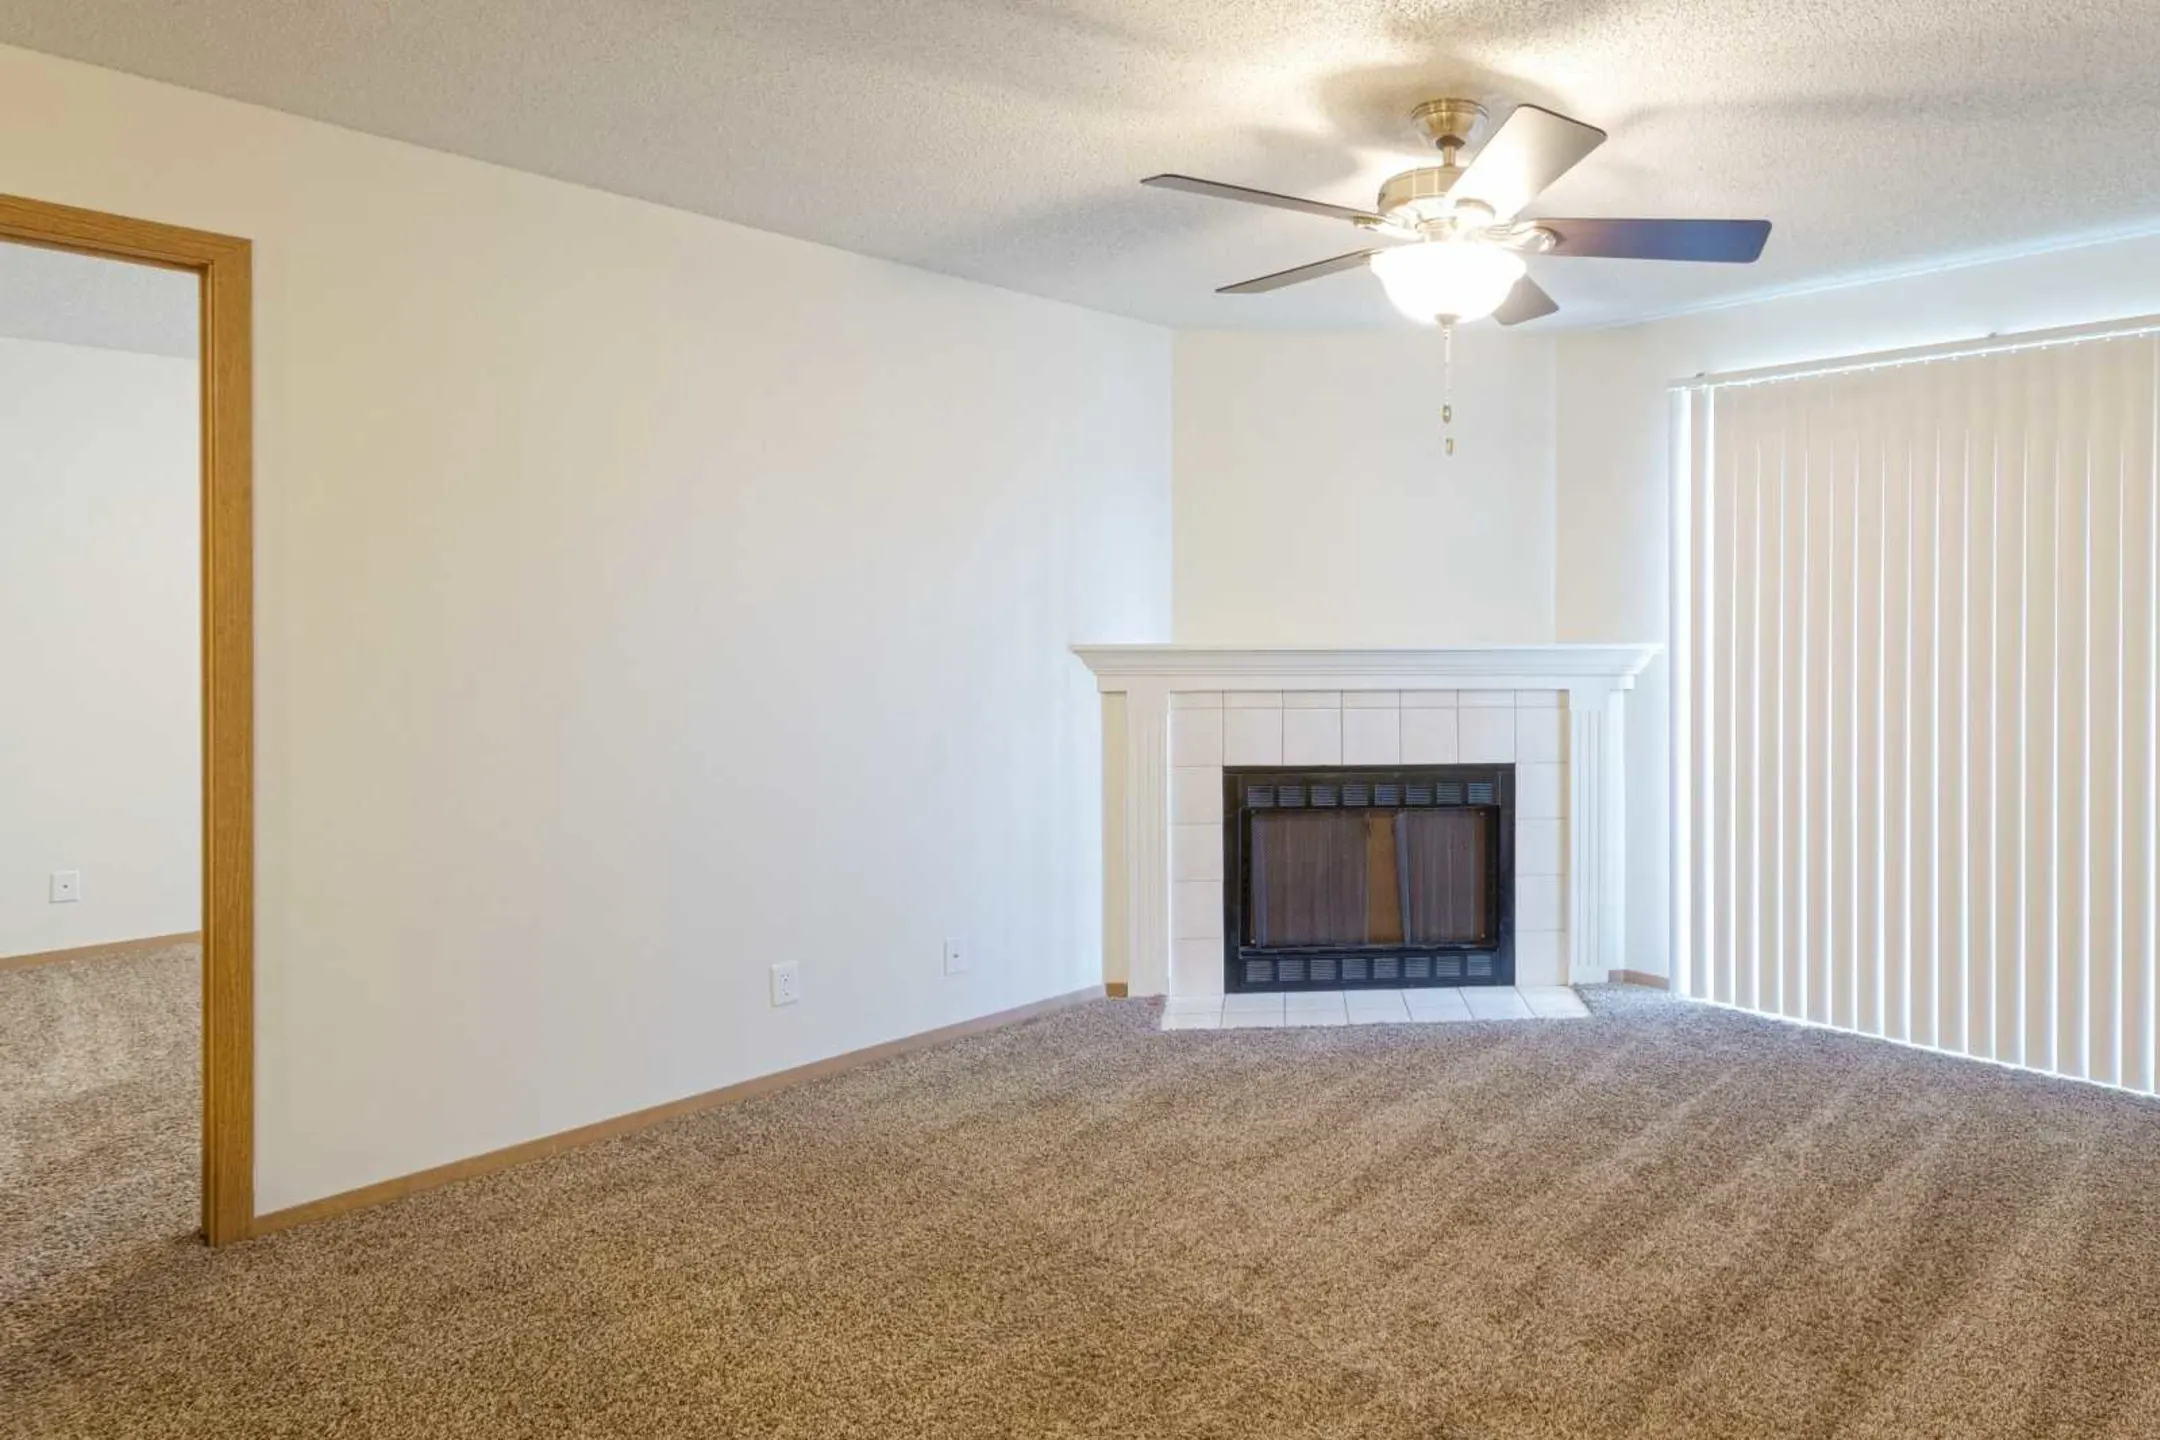 Living Room - Westbrooke Apartments - West Des Moines, IA